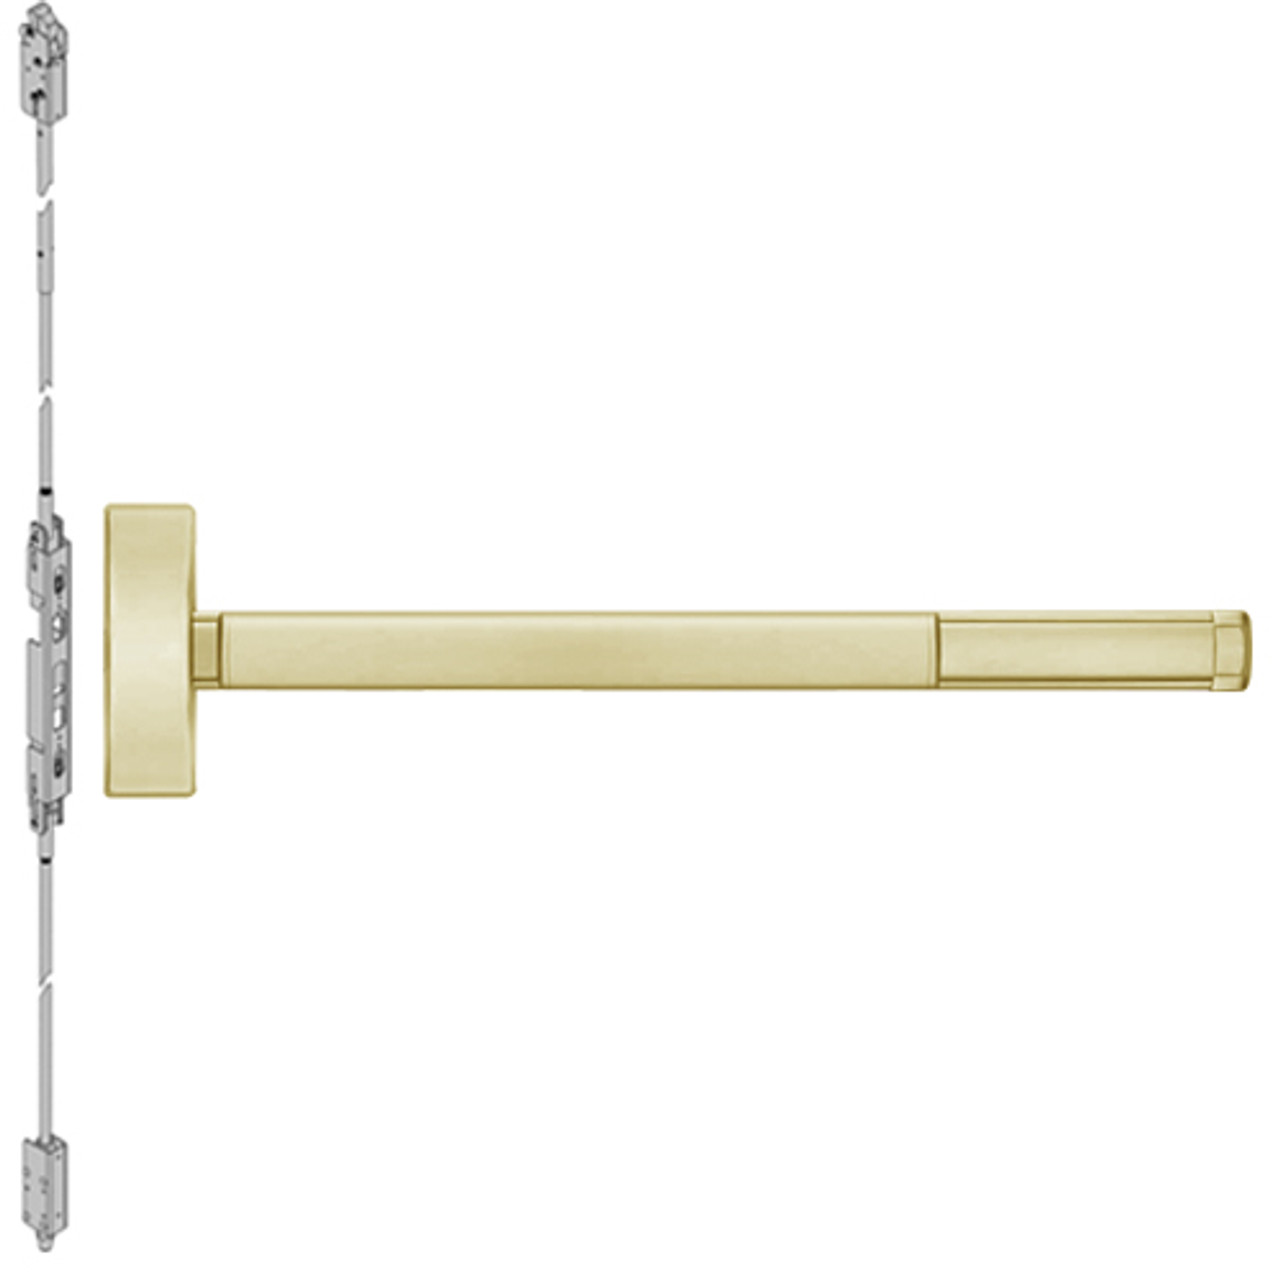 DE2802LBR-606-48 PHI 2800 Series Concealed Vertical Rod Exit Device with Delayed Egress Prepped for Dummy Trim in Satin Brass Finish